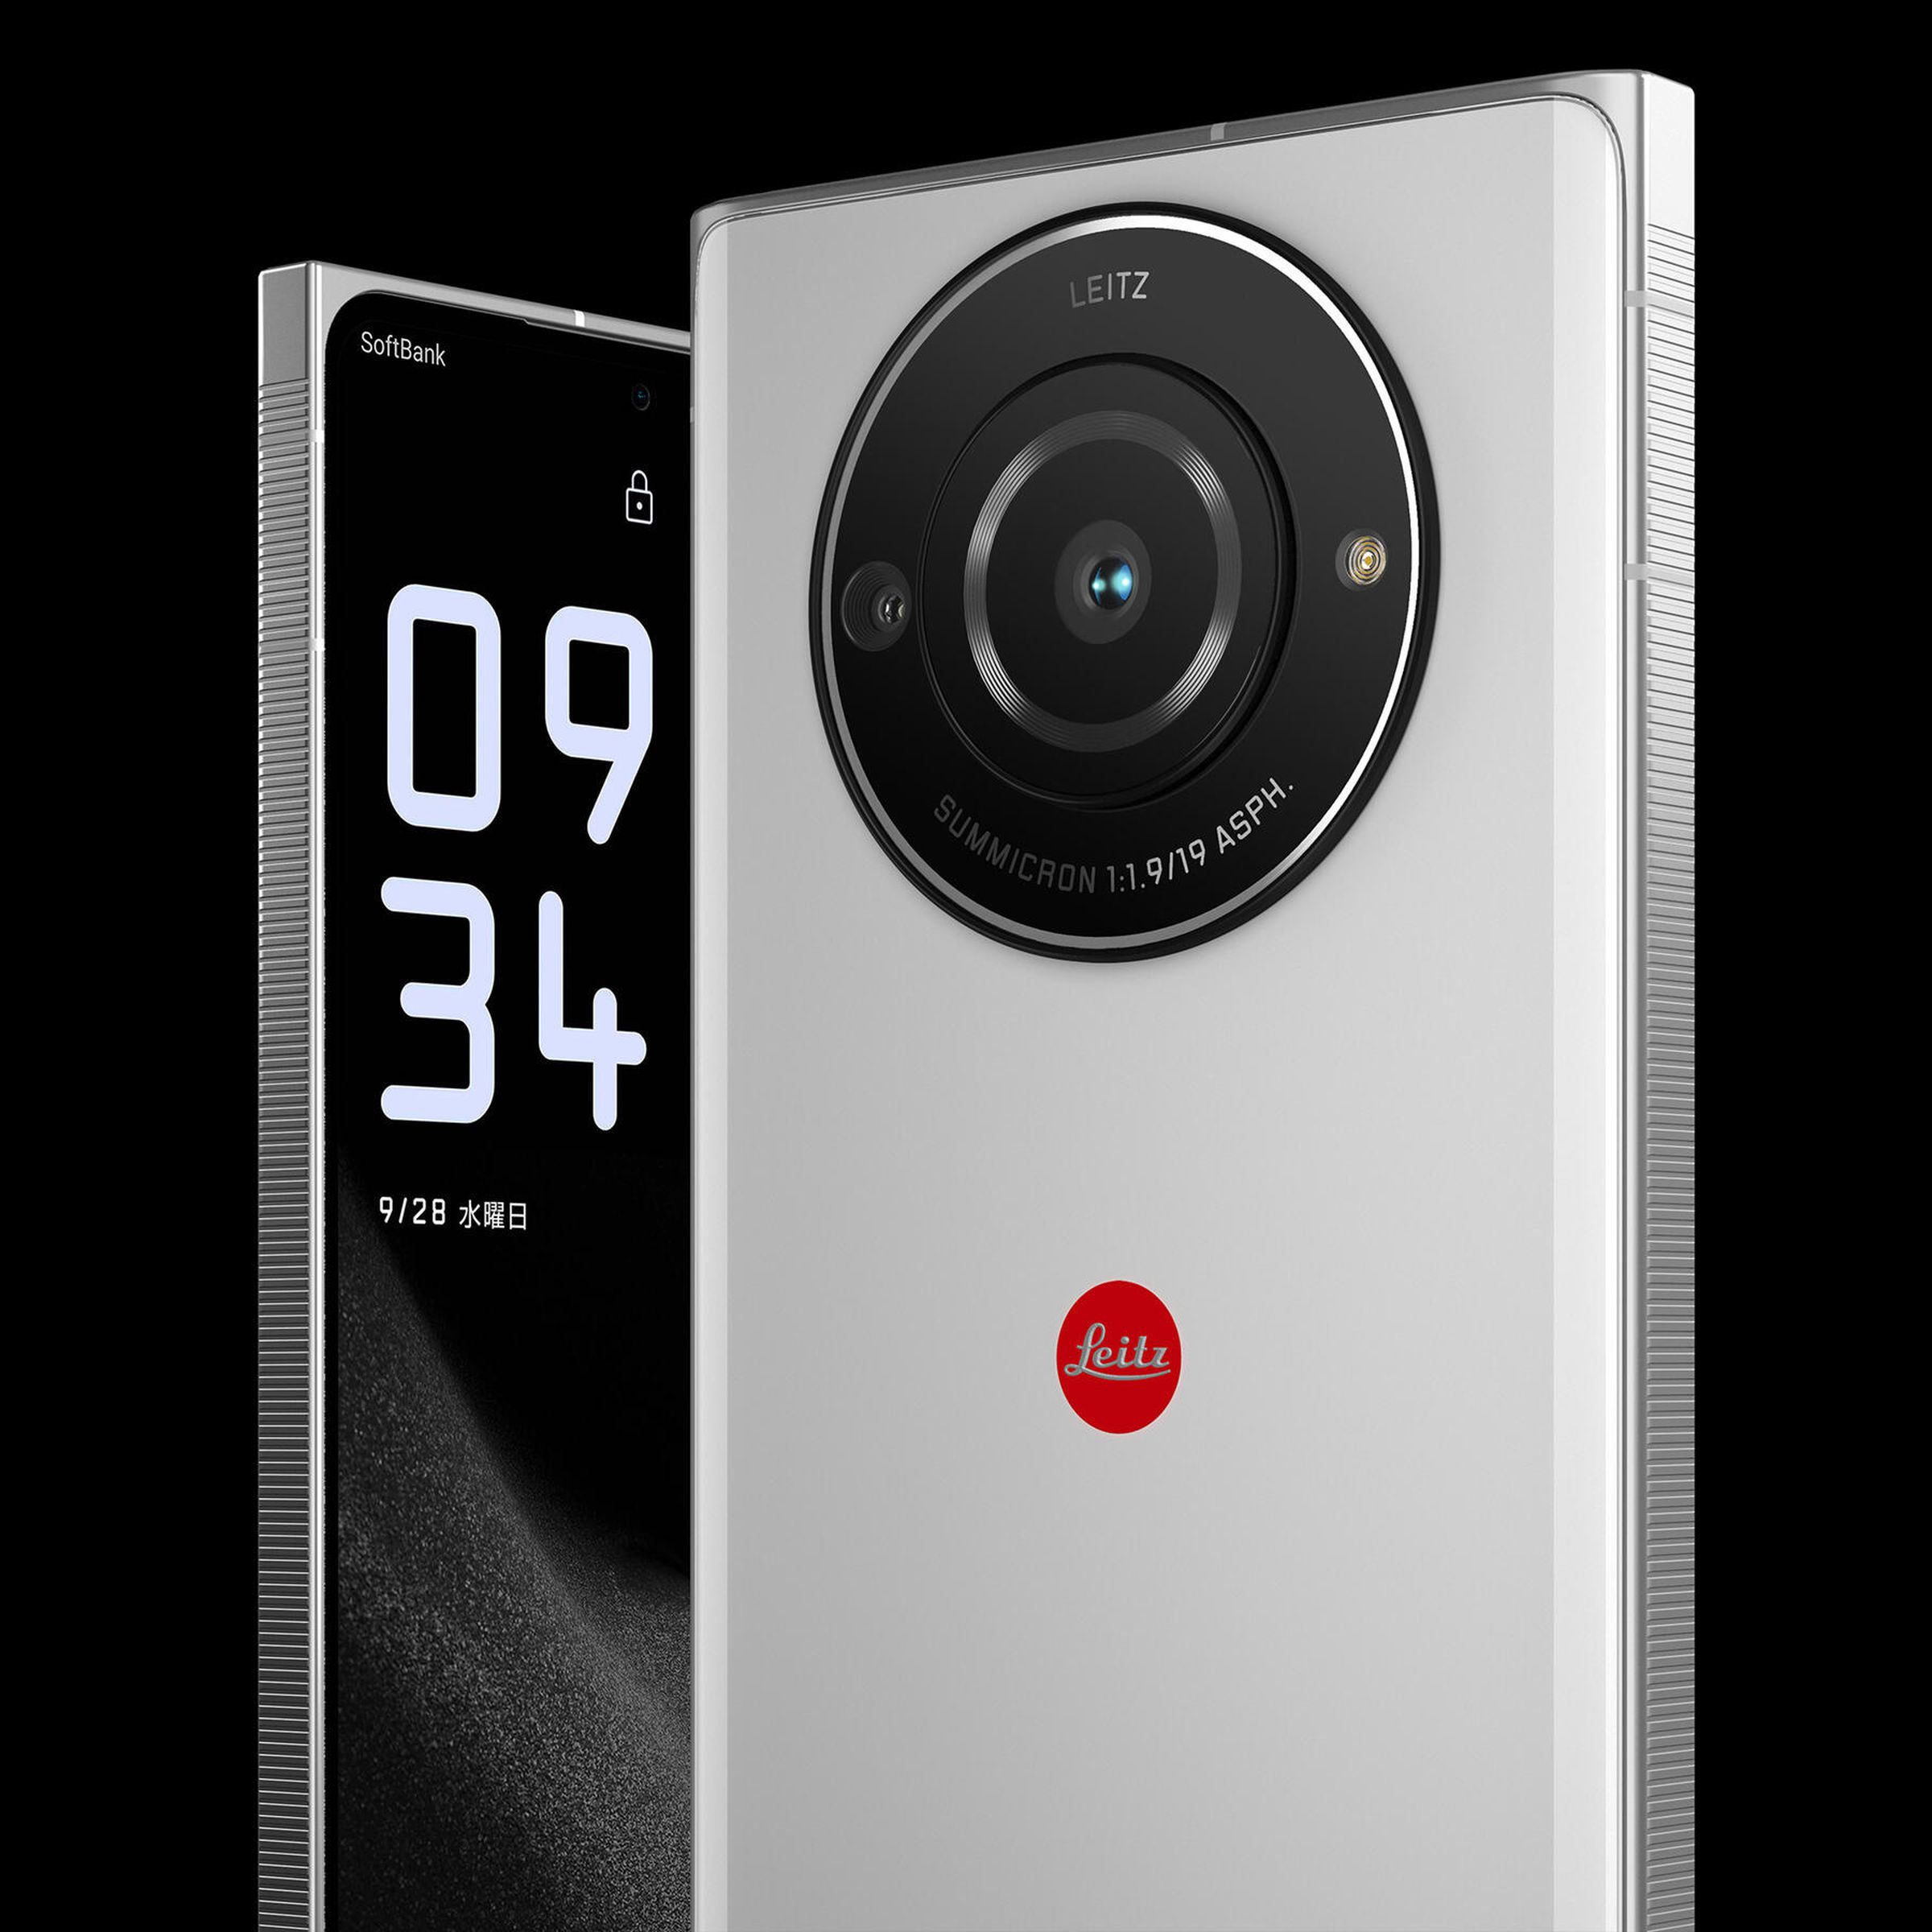 Render of the Leica Leitz Phone 2 rear and front panels.